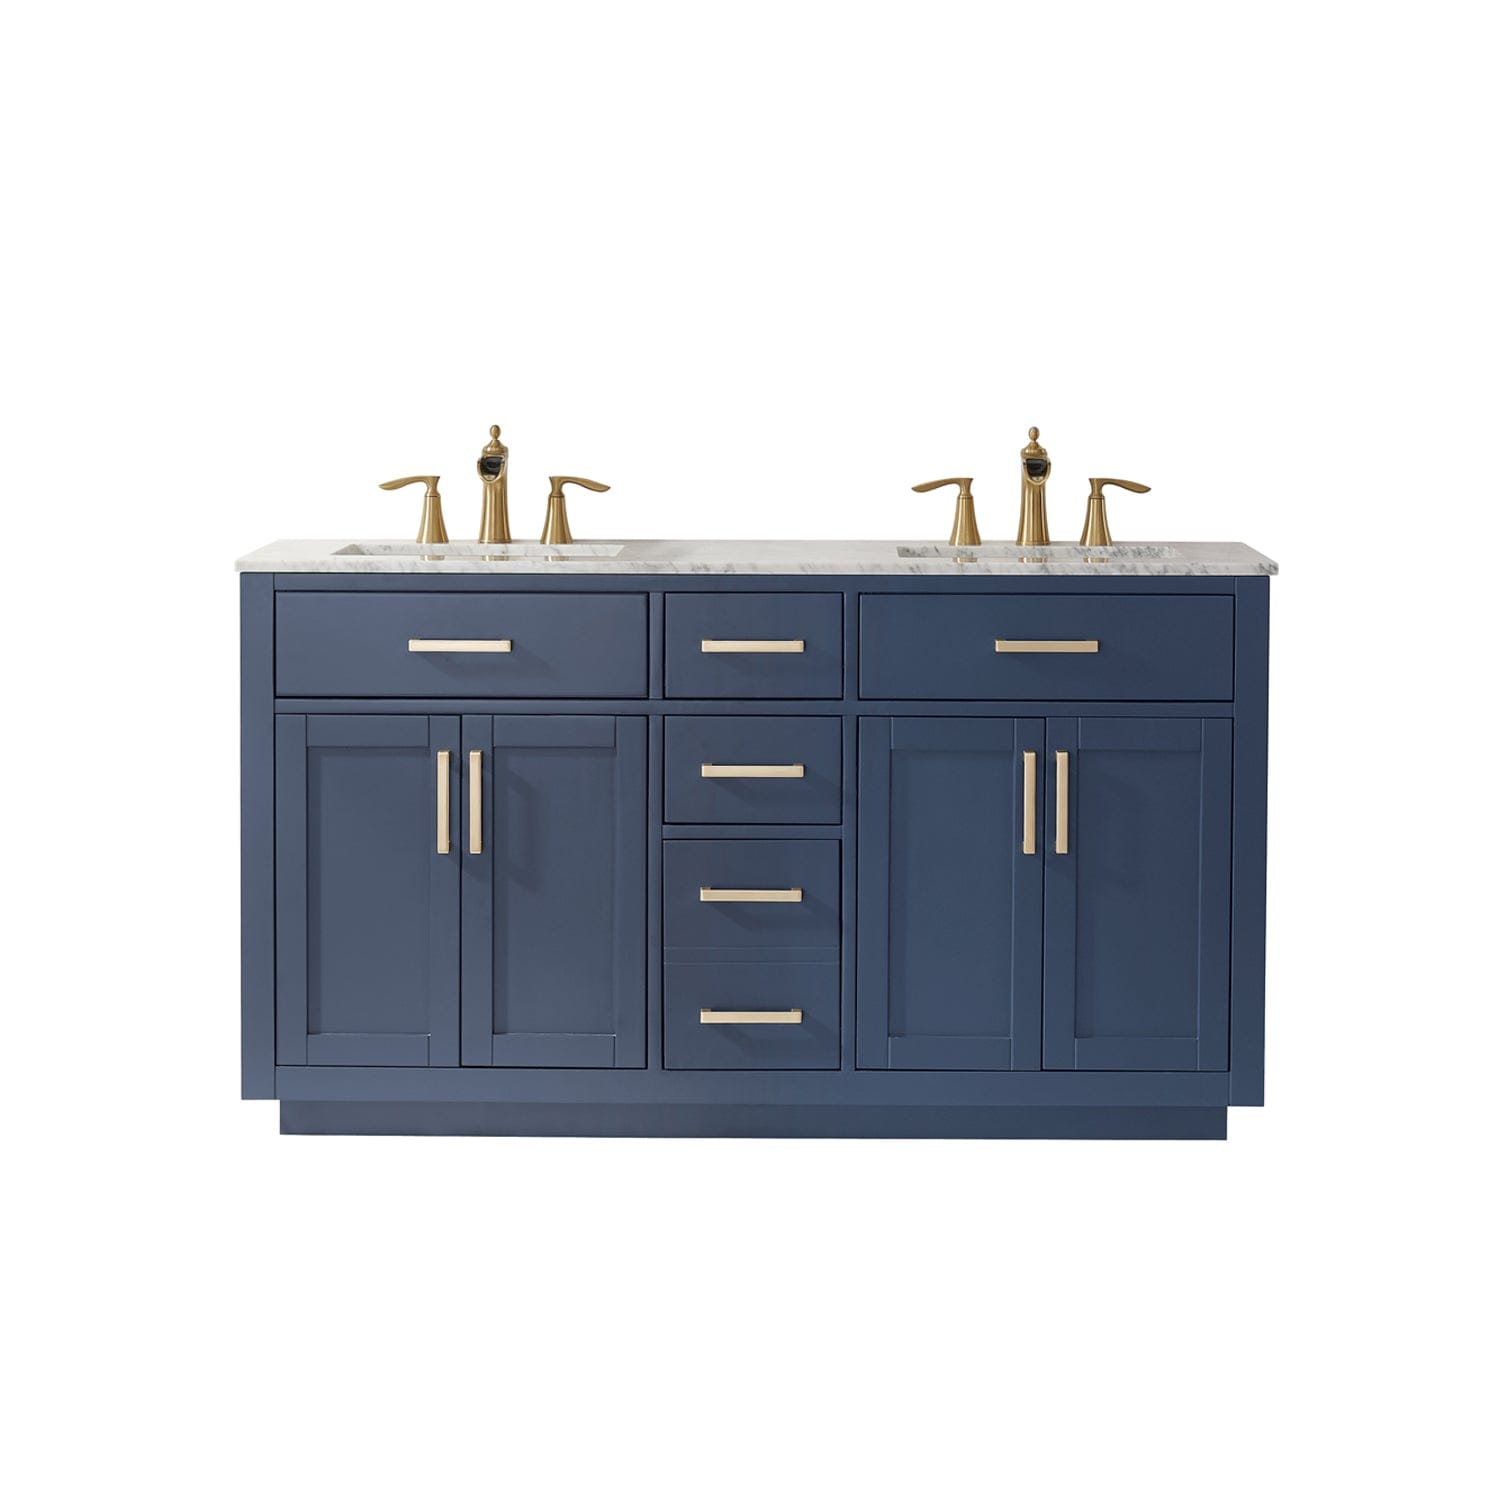 Altair Ivy 60" Double Bathroom Vanity Set in Royal Blue and Carrara White Marble Countertop without Mirror 531060-RB-CA-NM - Molaix631112971249Vanity531060-RB-CA-NM